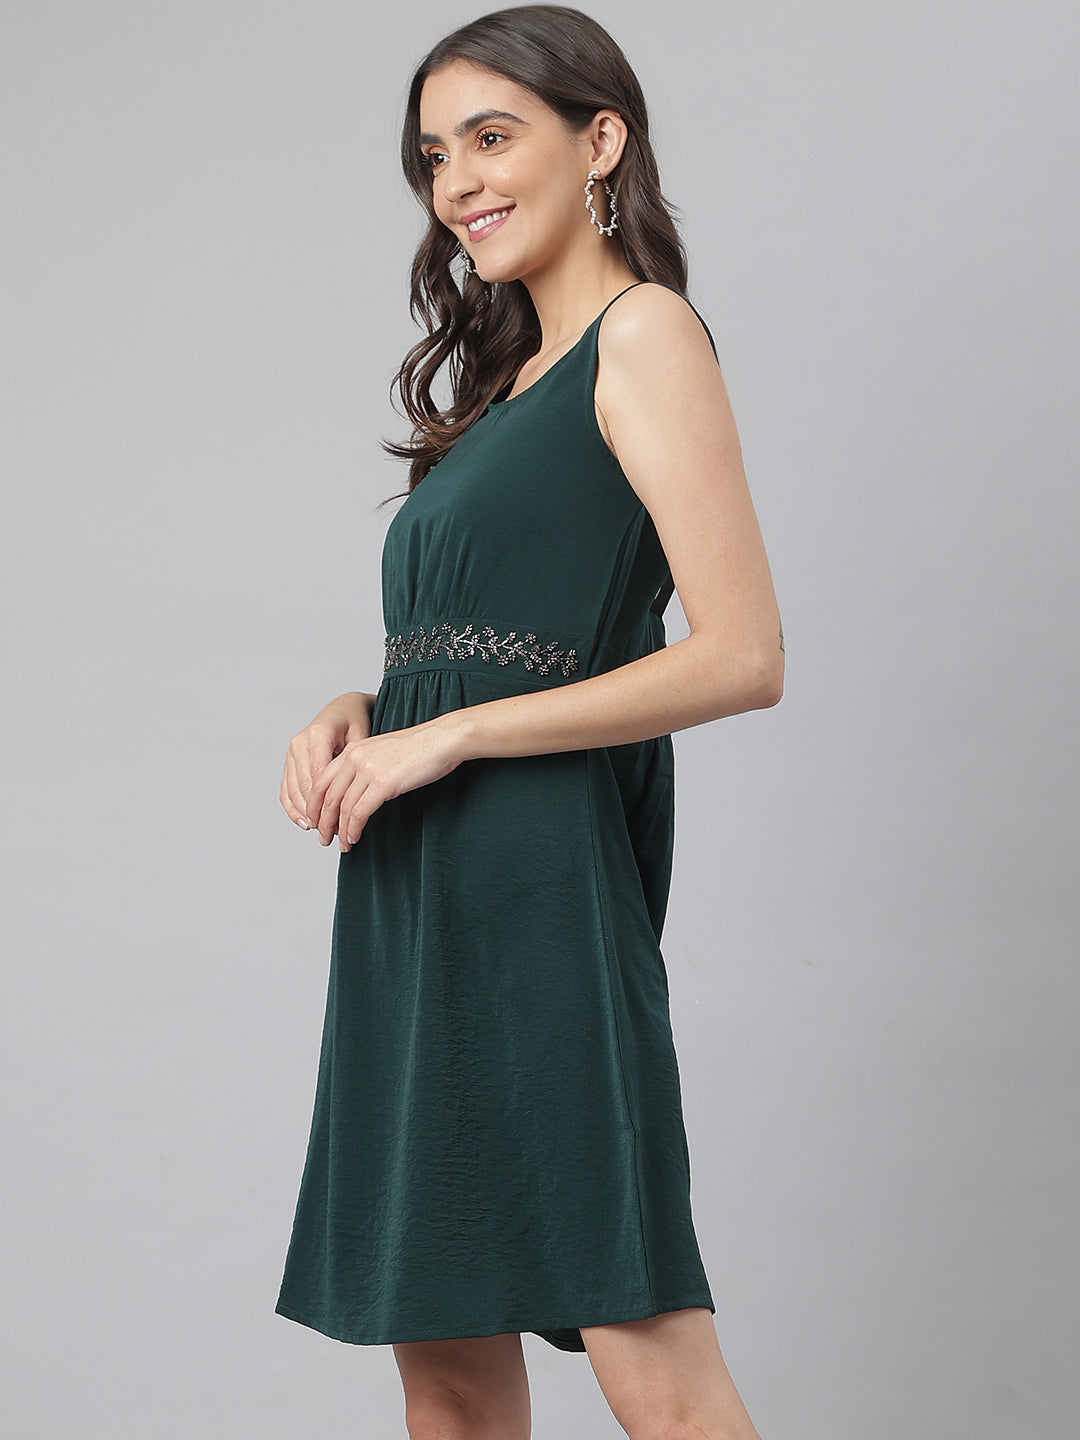 99408 - Bottle Green Woven Formal Dress Ith Embroidered Waist Band & Side Zip